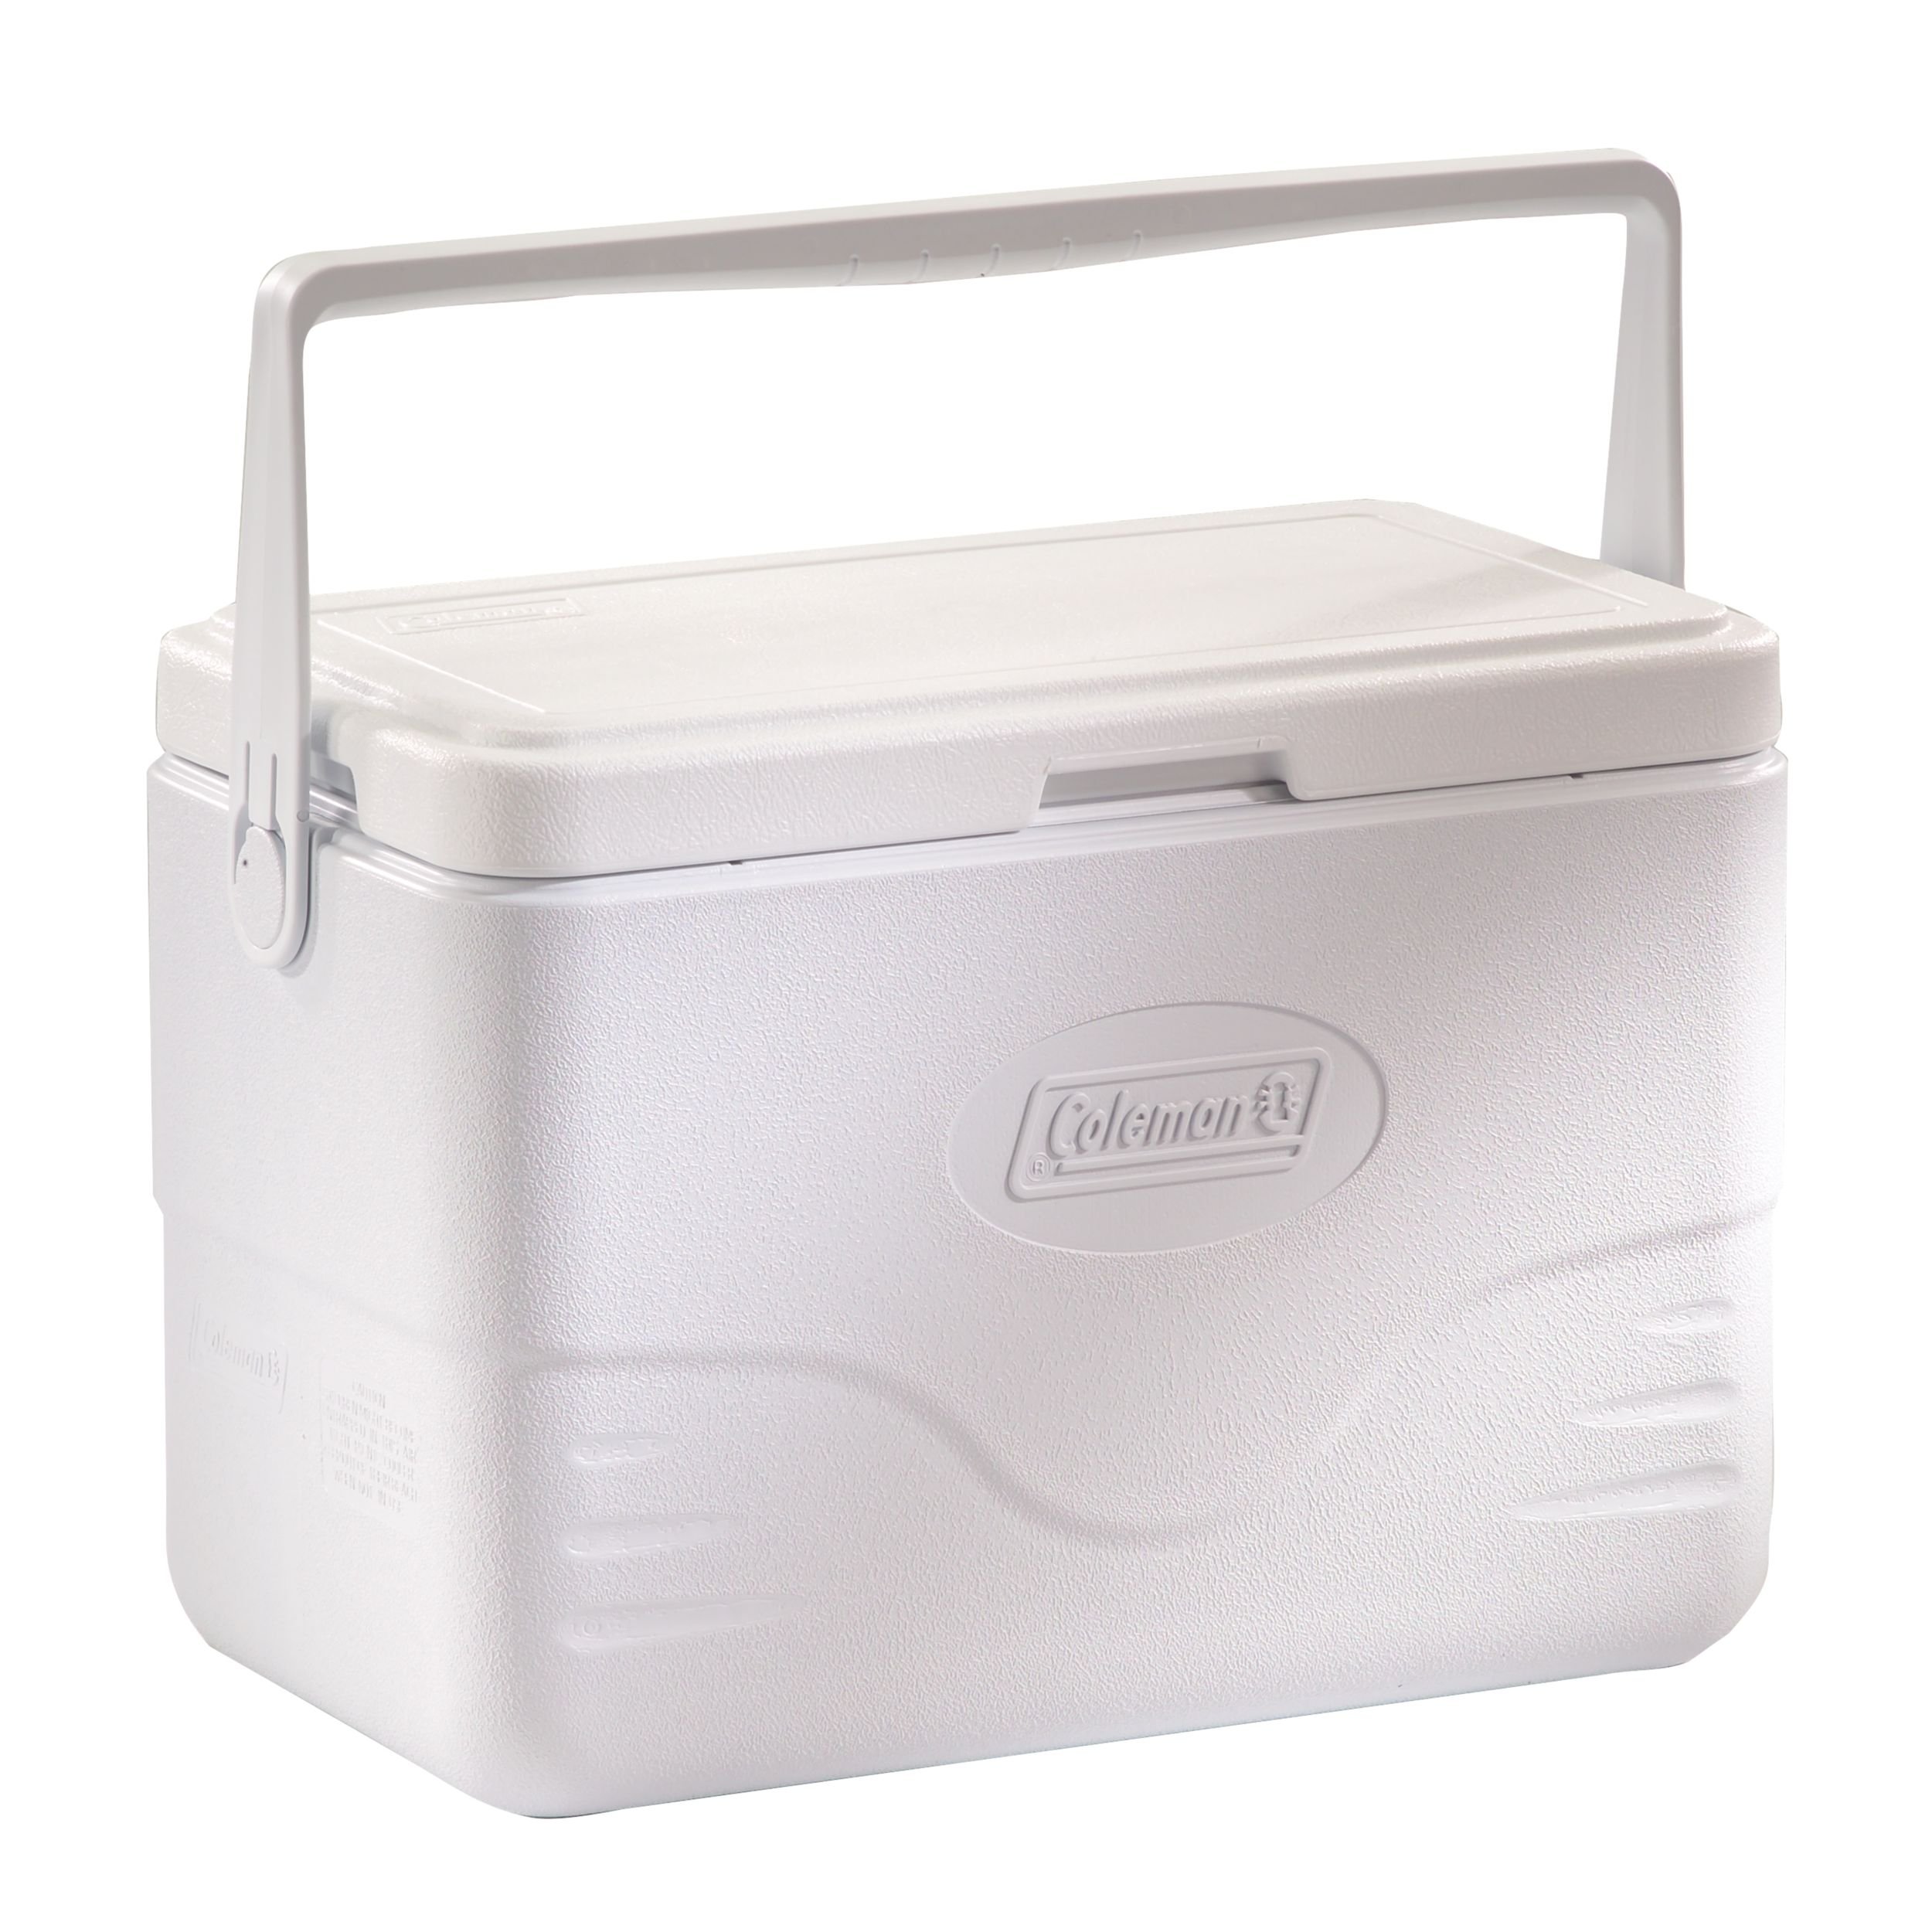 coleman xtreme marine cooler review